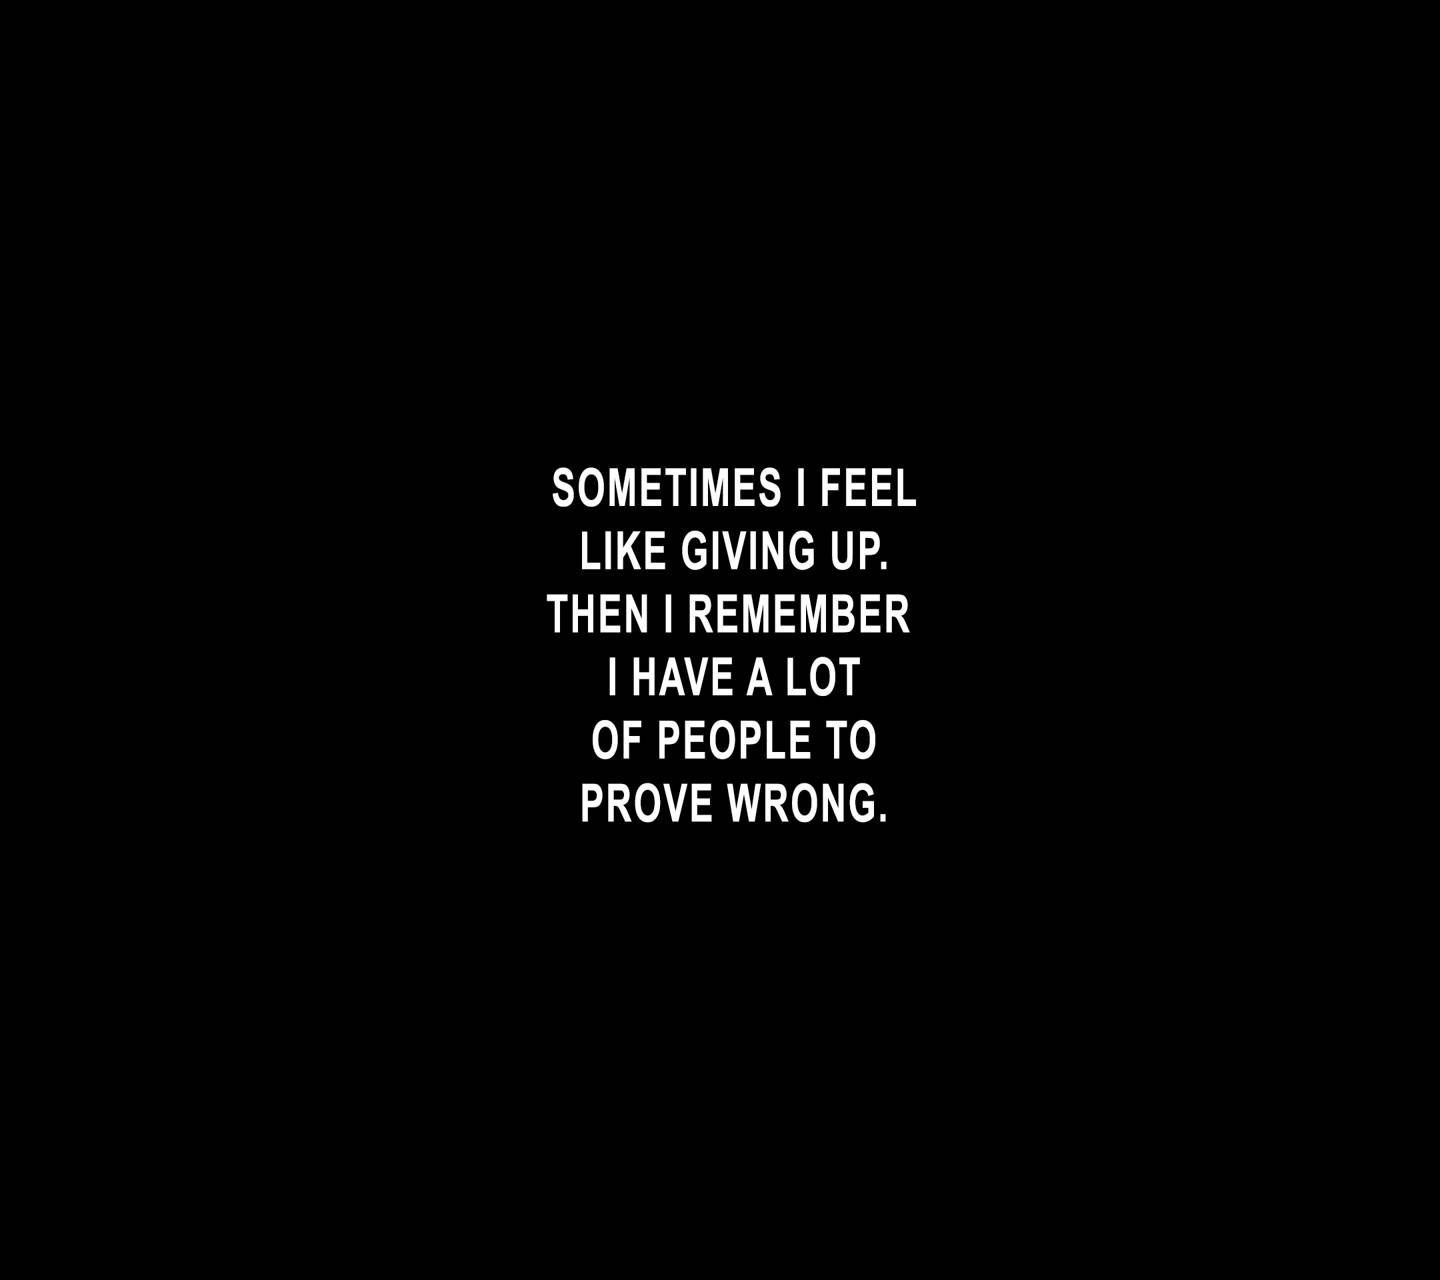 Prove Them Wrong Wallpapers - Wallpaper Cave